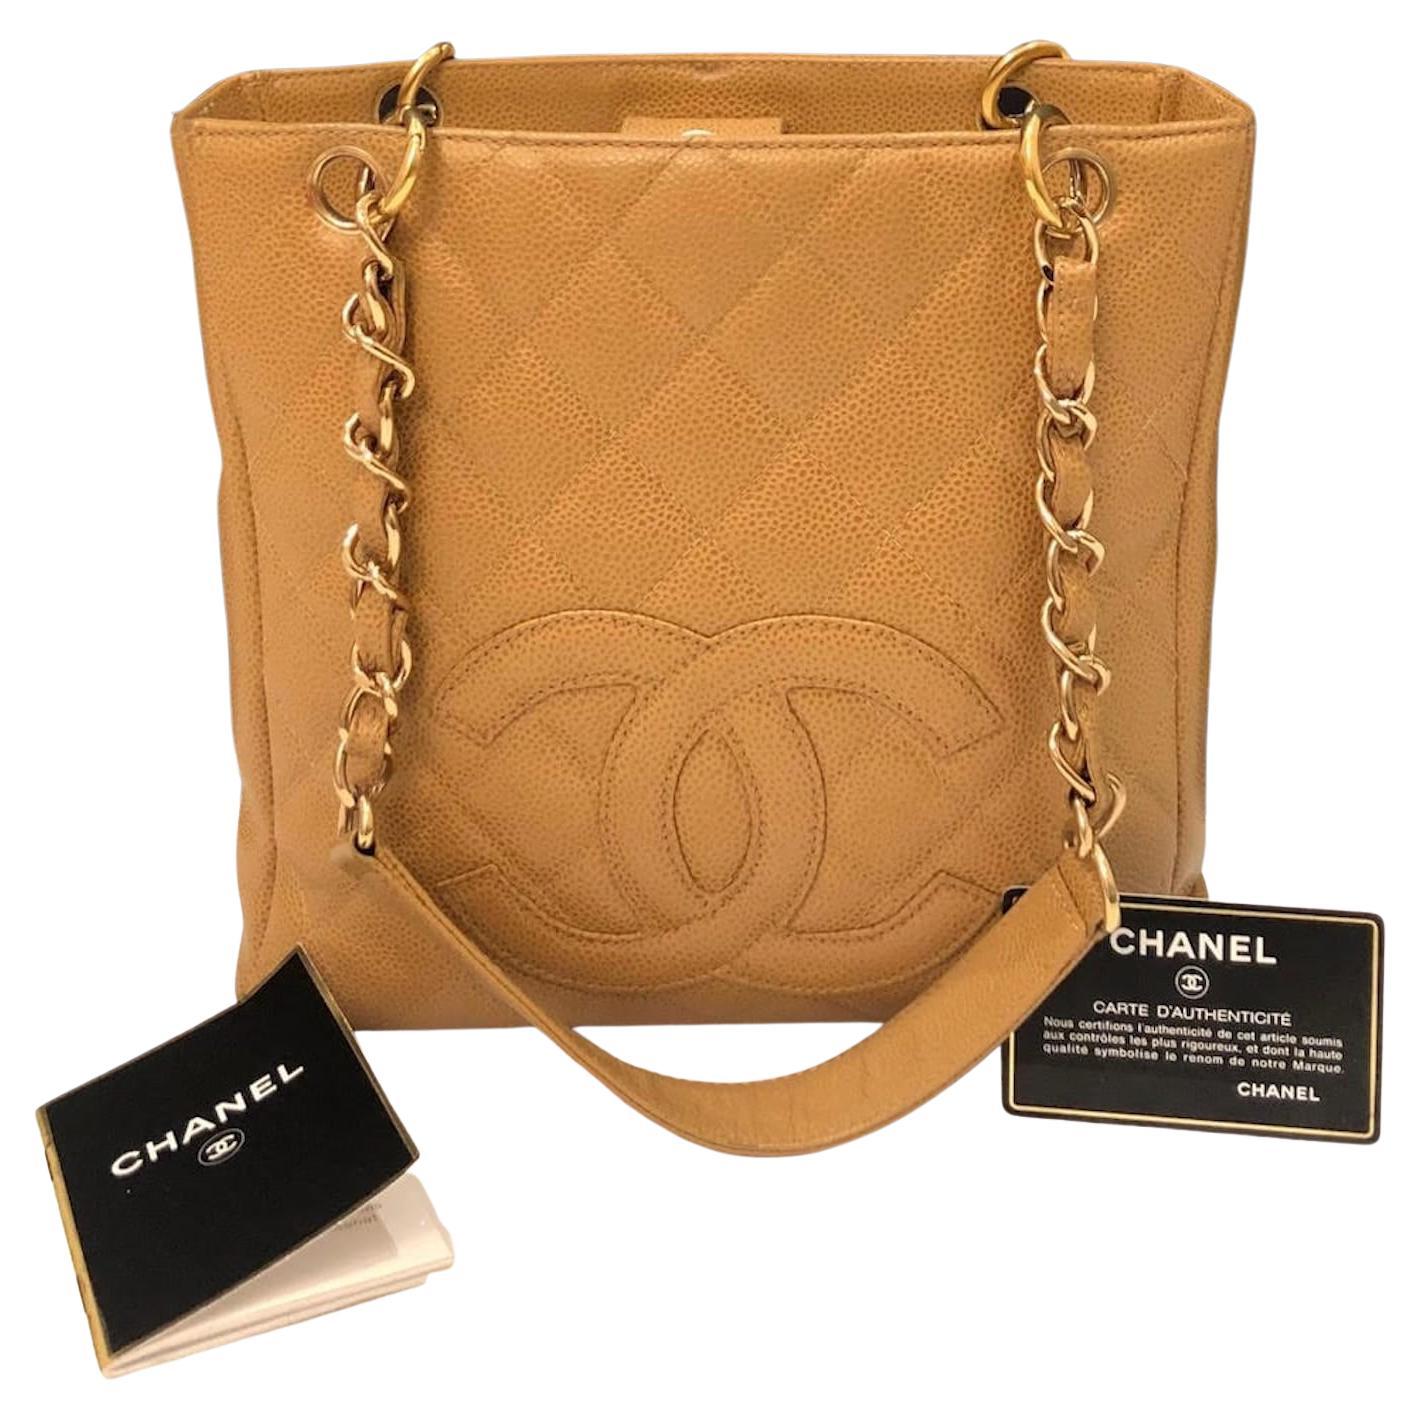 chanel pink shopping tote bag